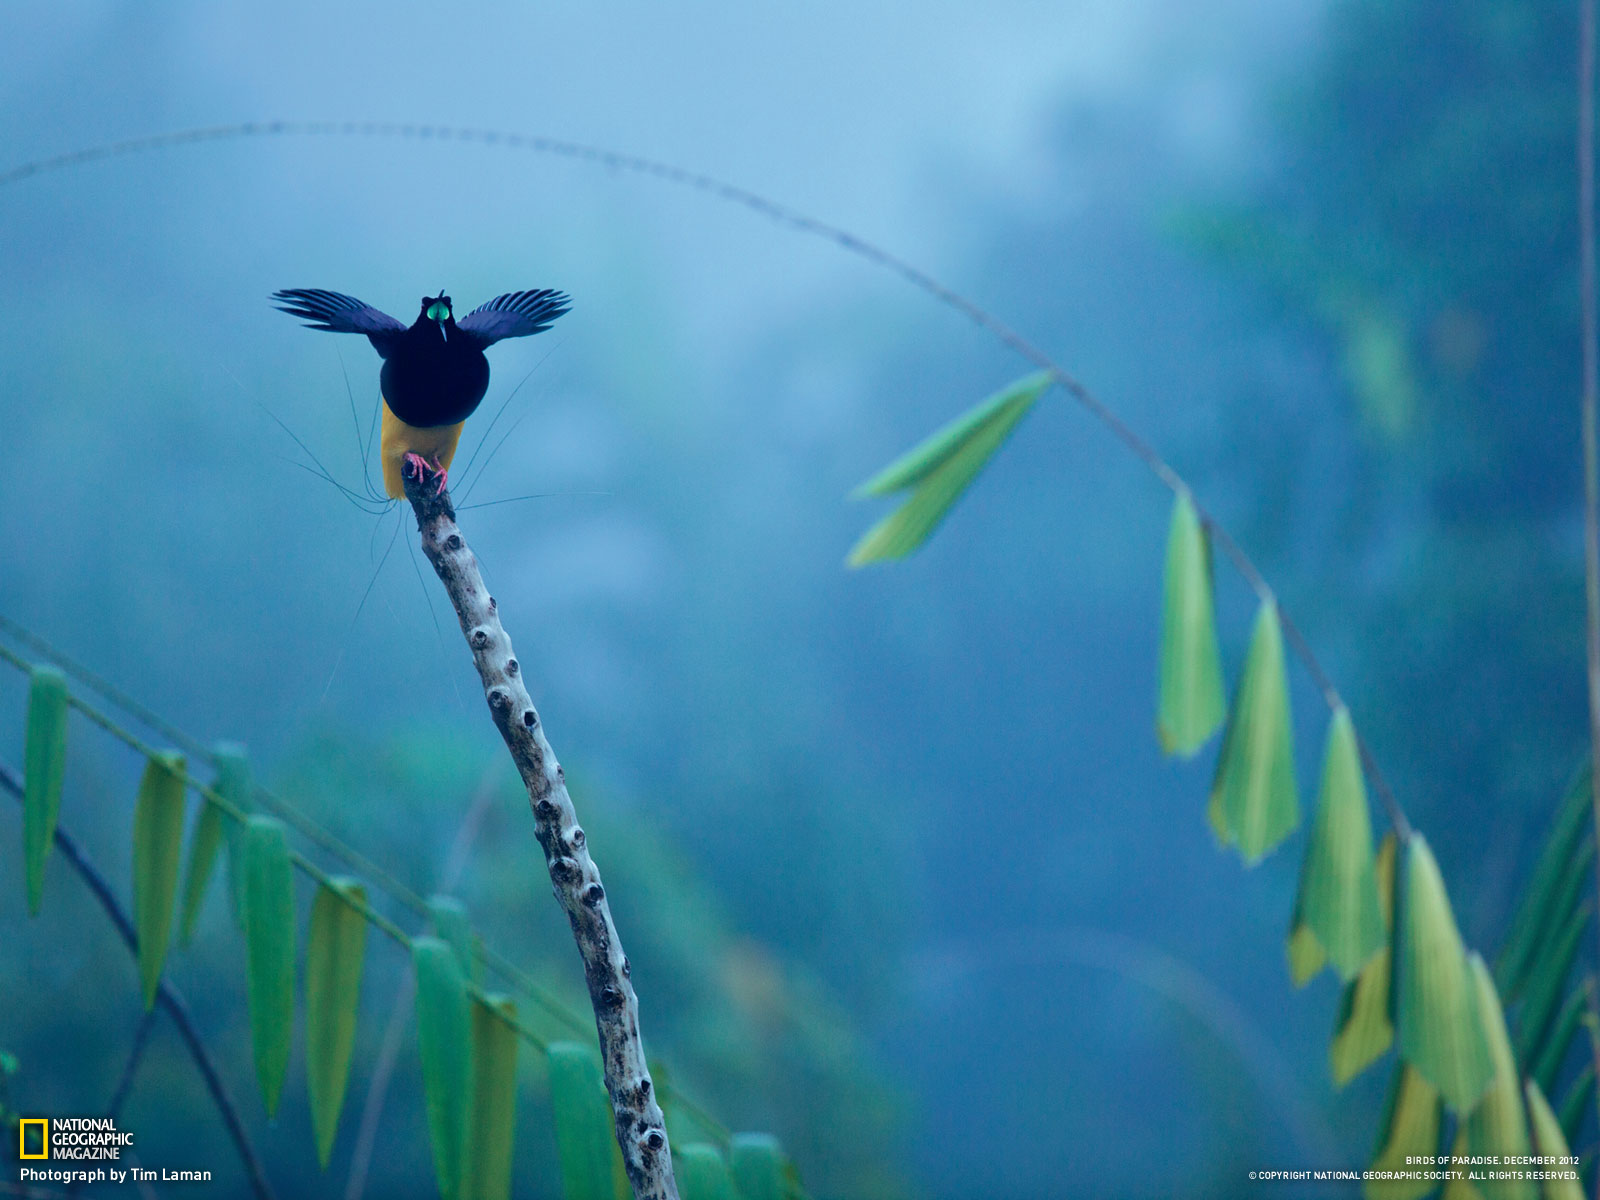 From Birds of Paradise National Geographic December 2012